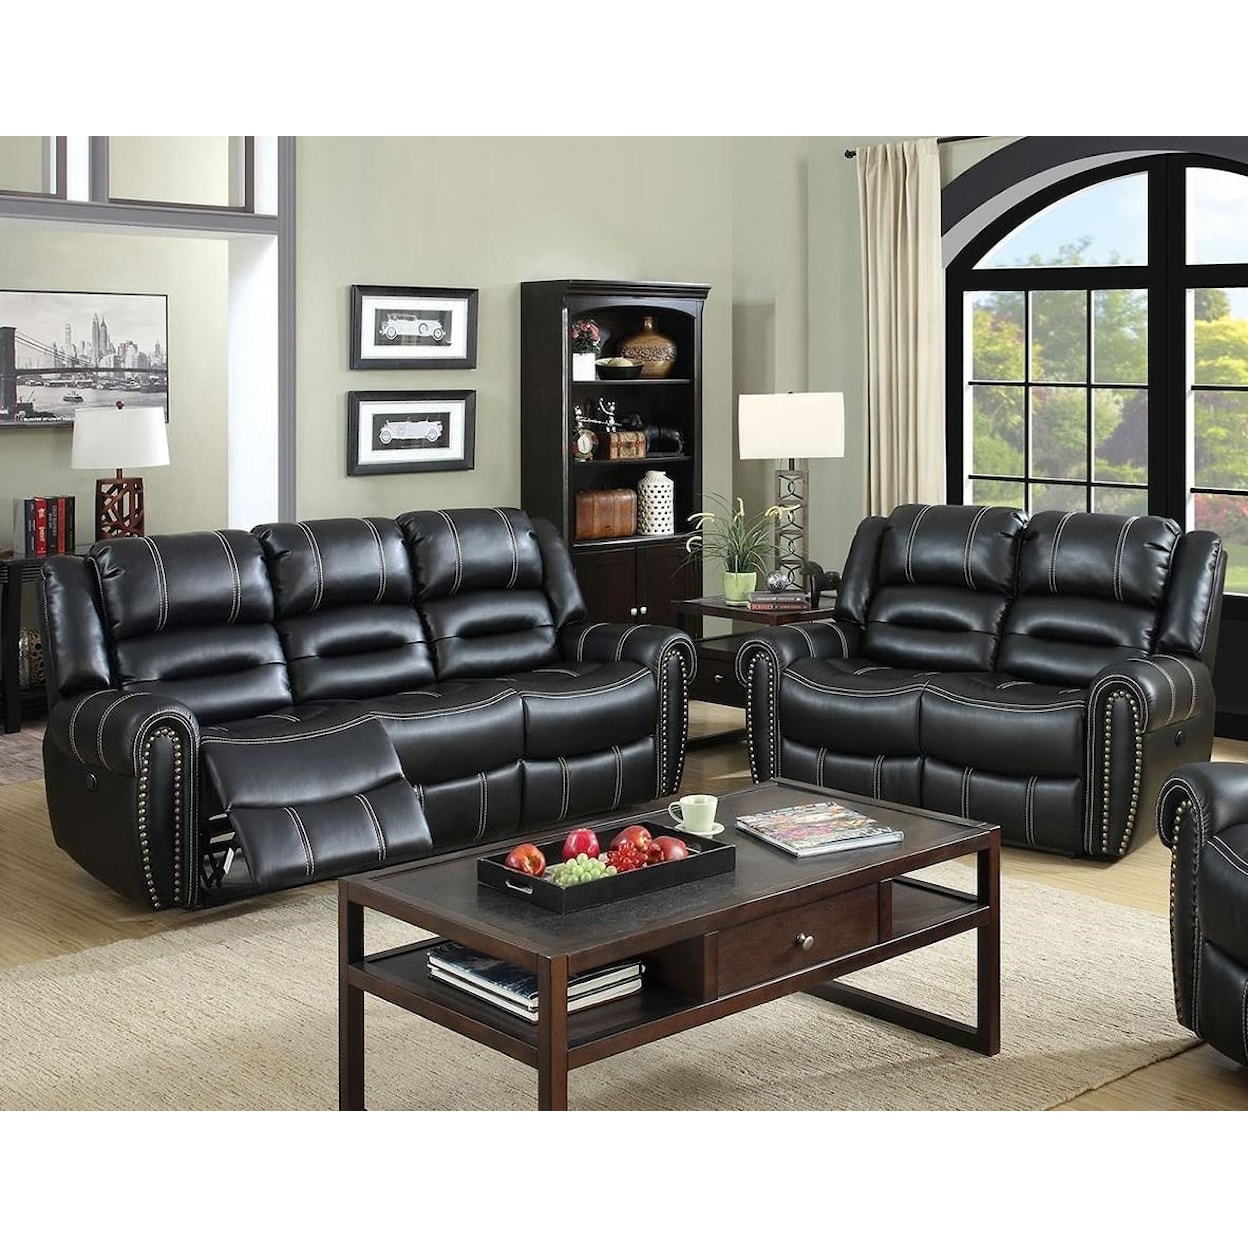 FUSA Frederick Reclining Living Room Group